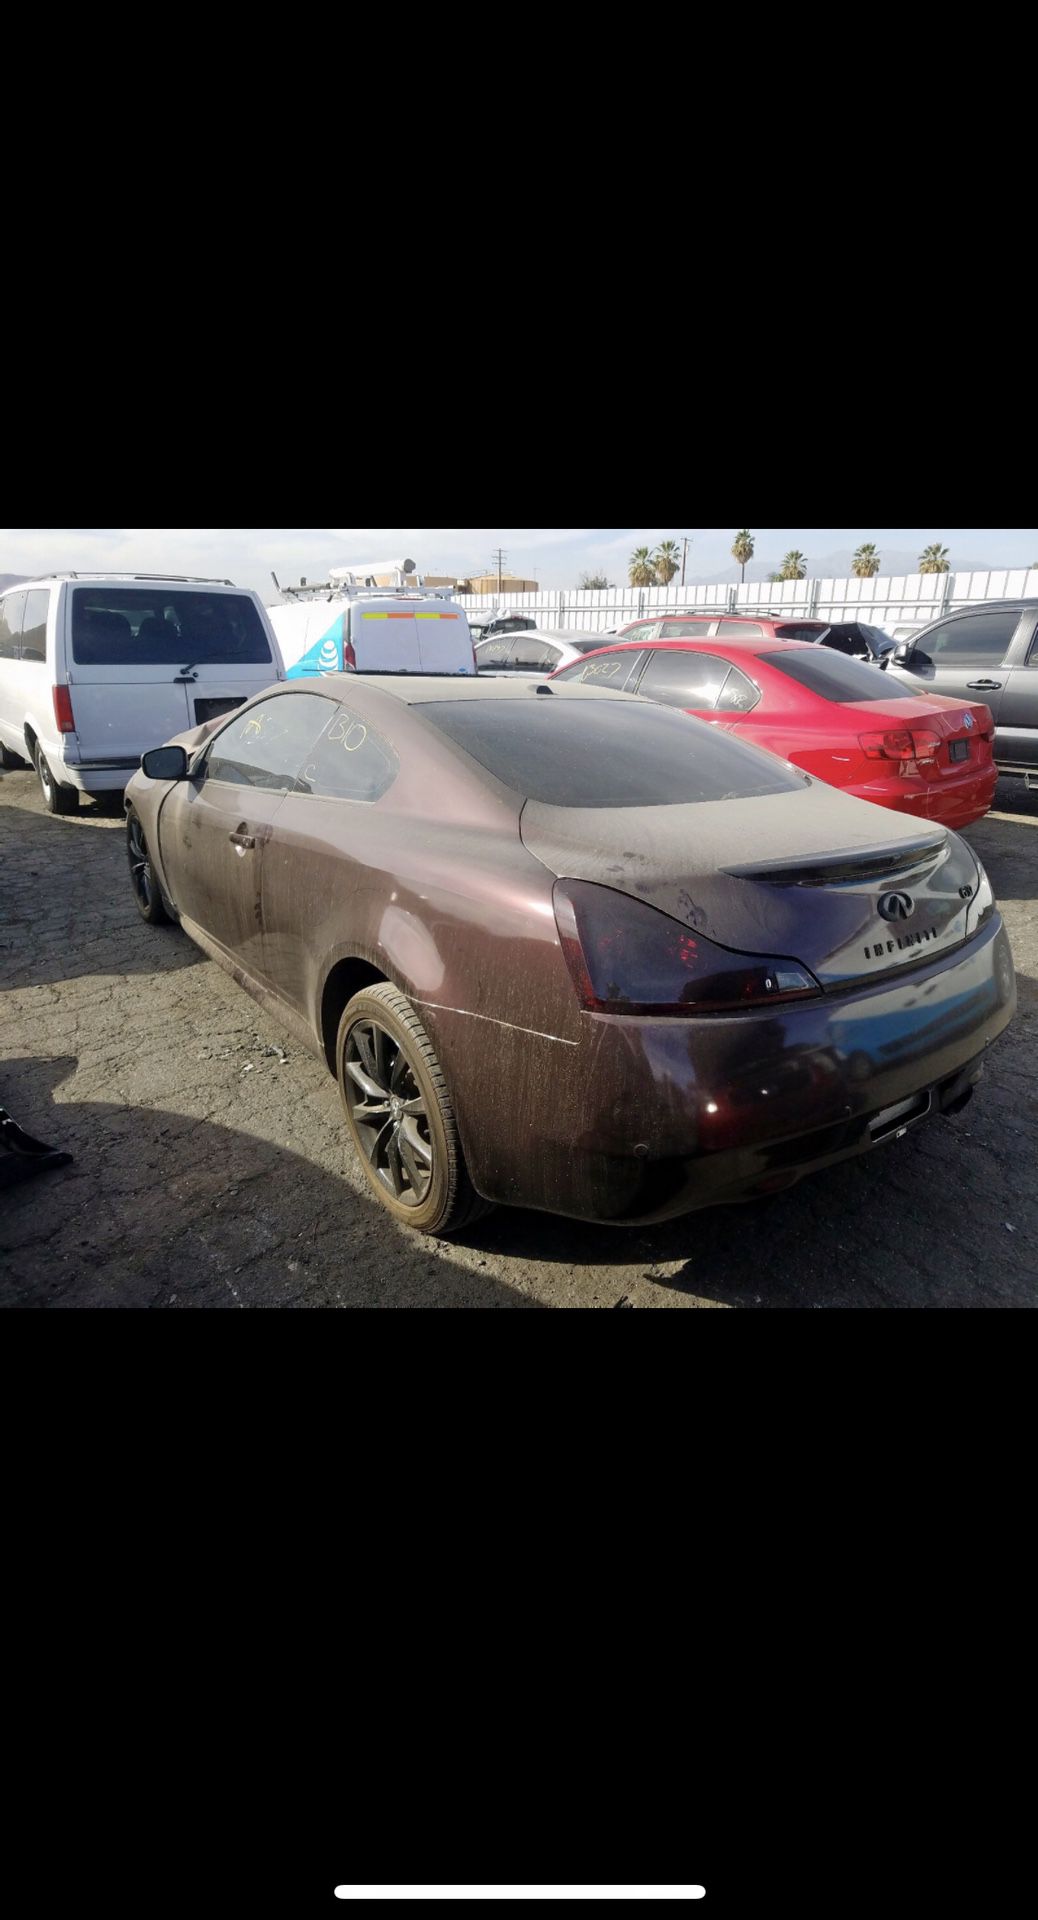 2012 Infiniti G37 parting out - parts only!!!